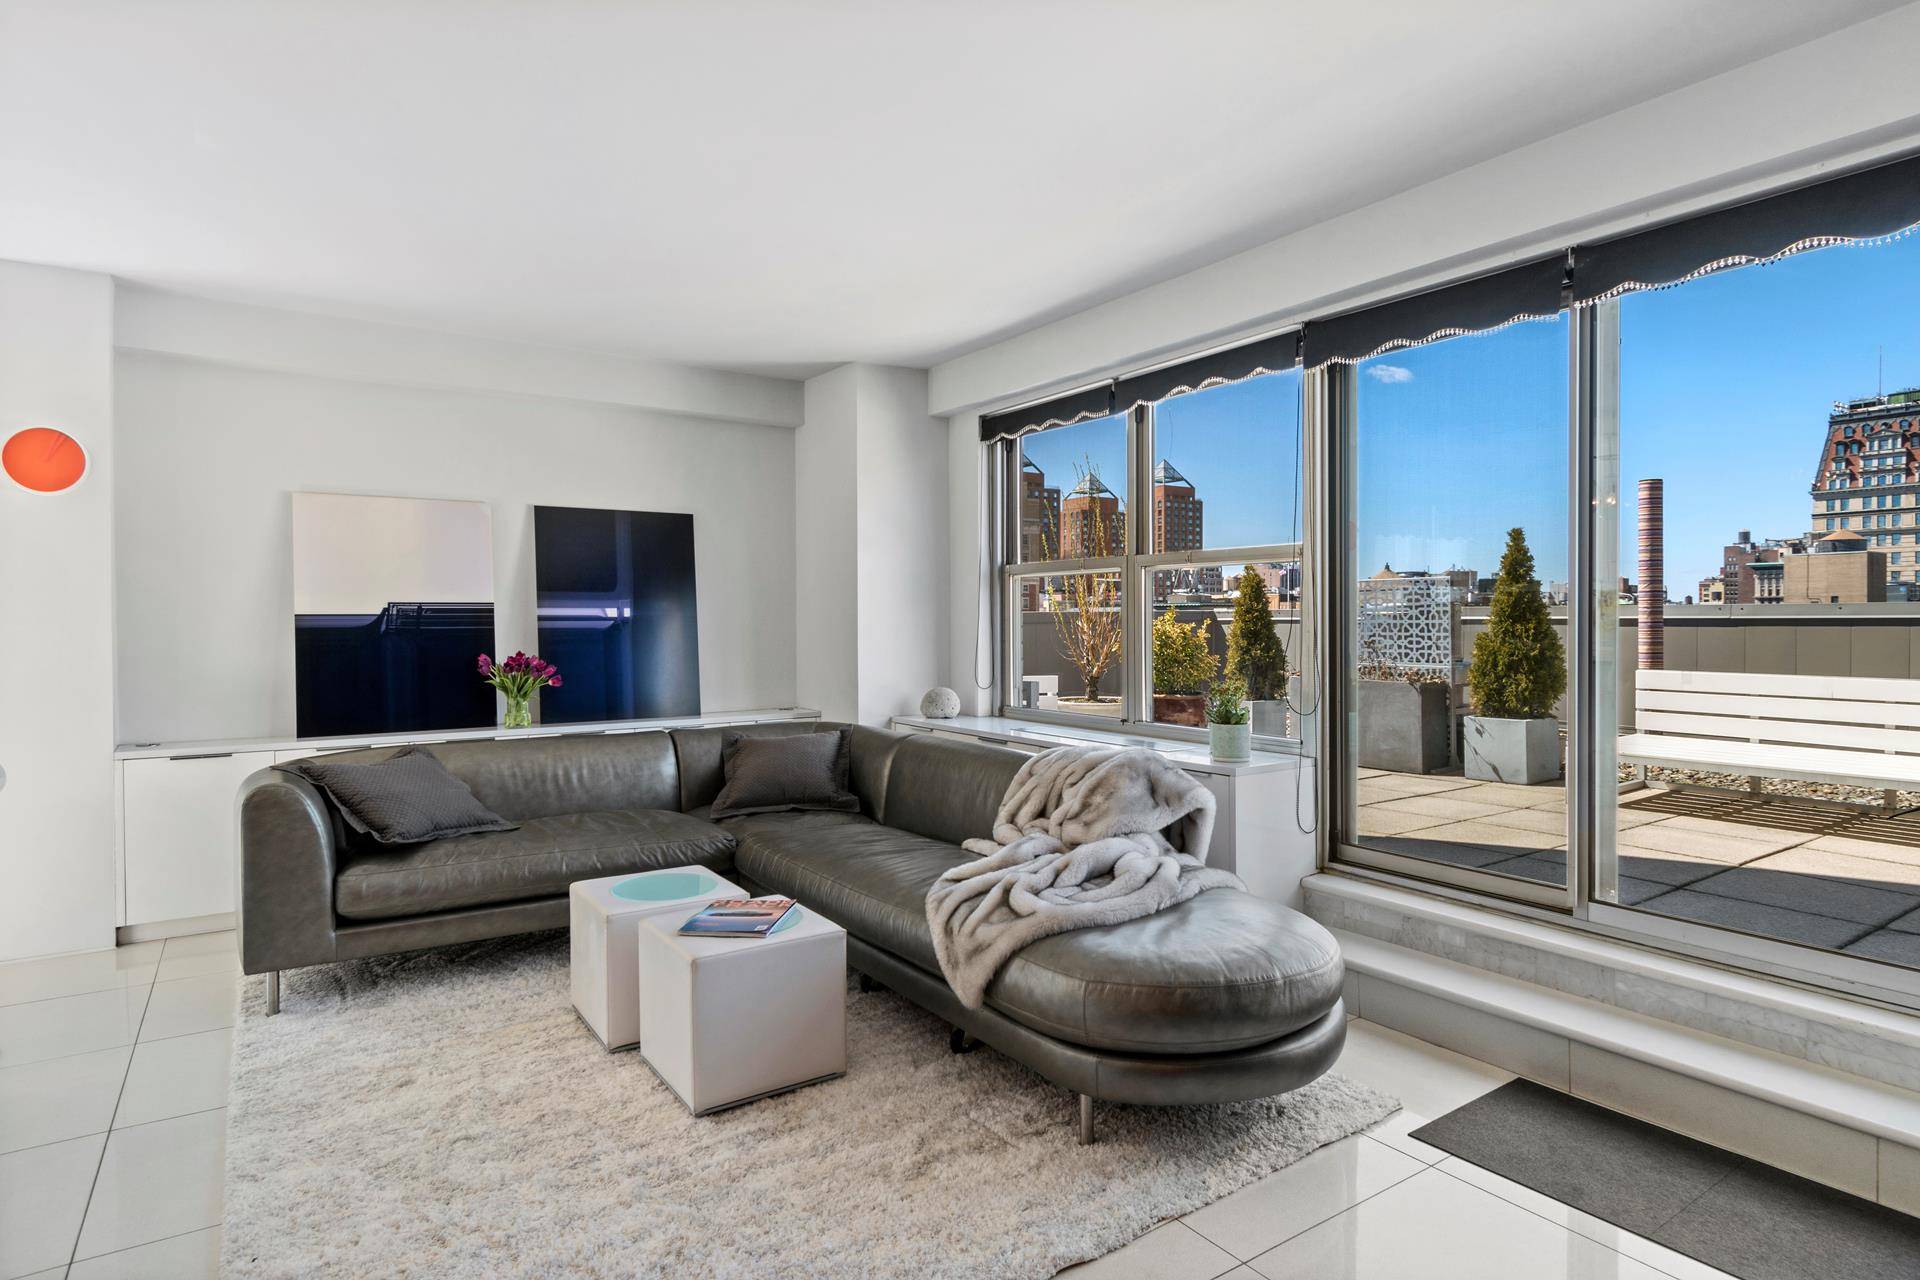 Rarely available ! This pin drop quiet one bedroom home with sensational OPEN SKIES south and west views from the spectacular terrace will leave you breathless.